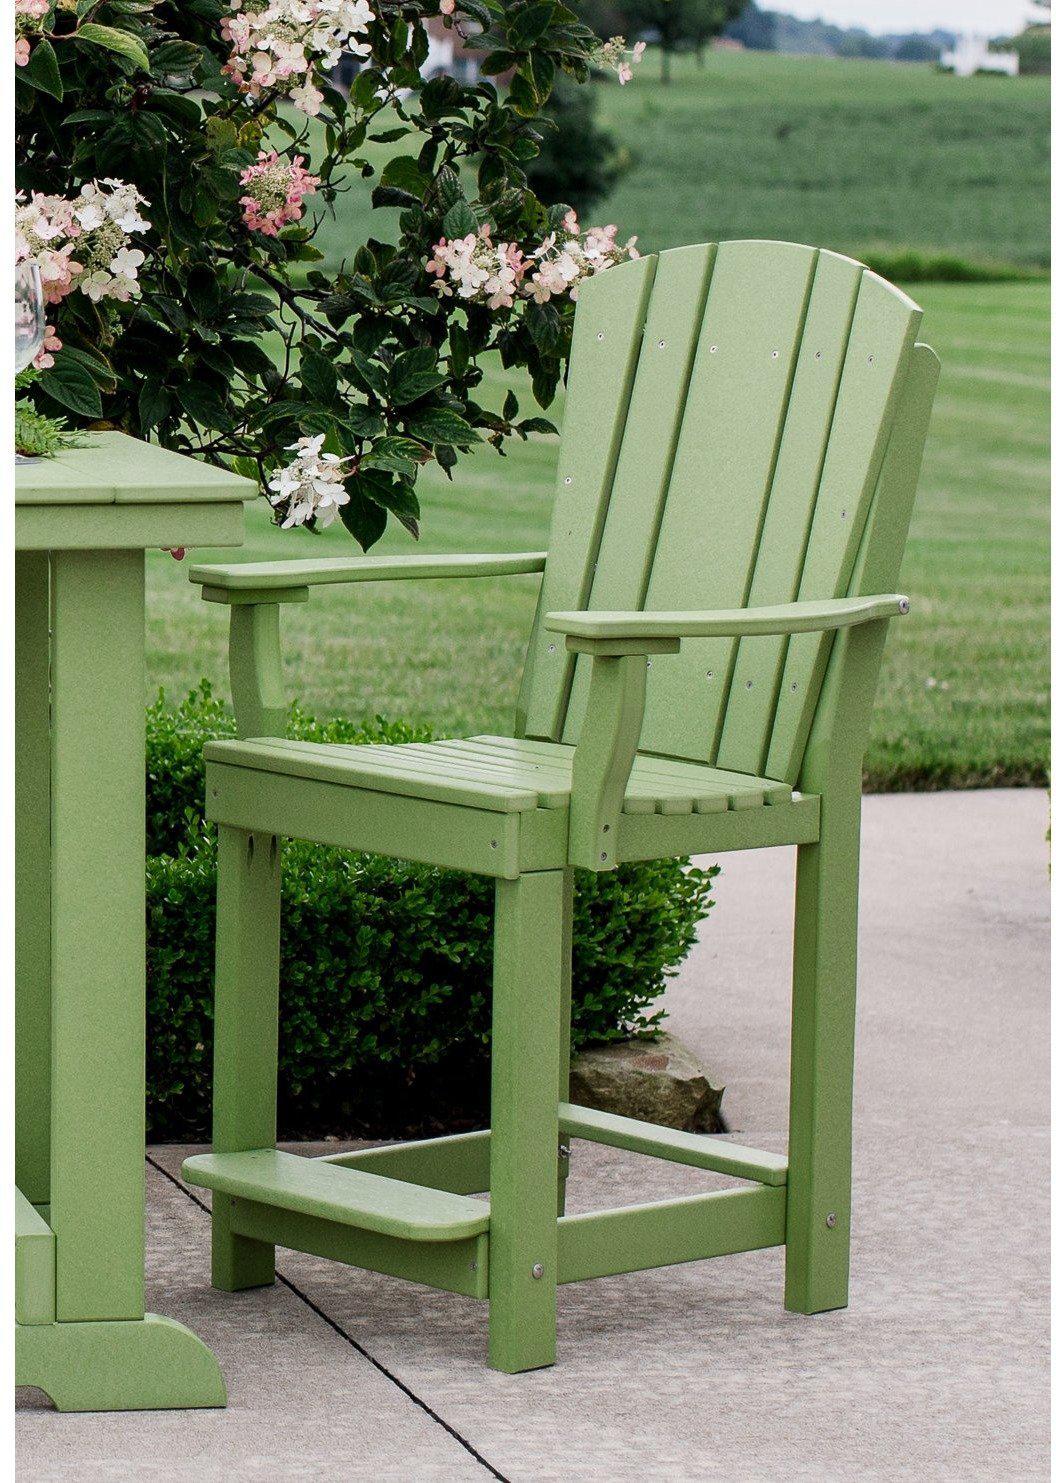 Wildridge Heritage Recycled Plastic Patio Chair - Seat Height 23.6”(Counter Height) - LEAD TIME TO SHIP 6 WEEKS OR LESS